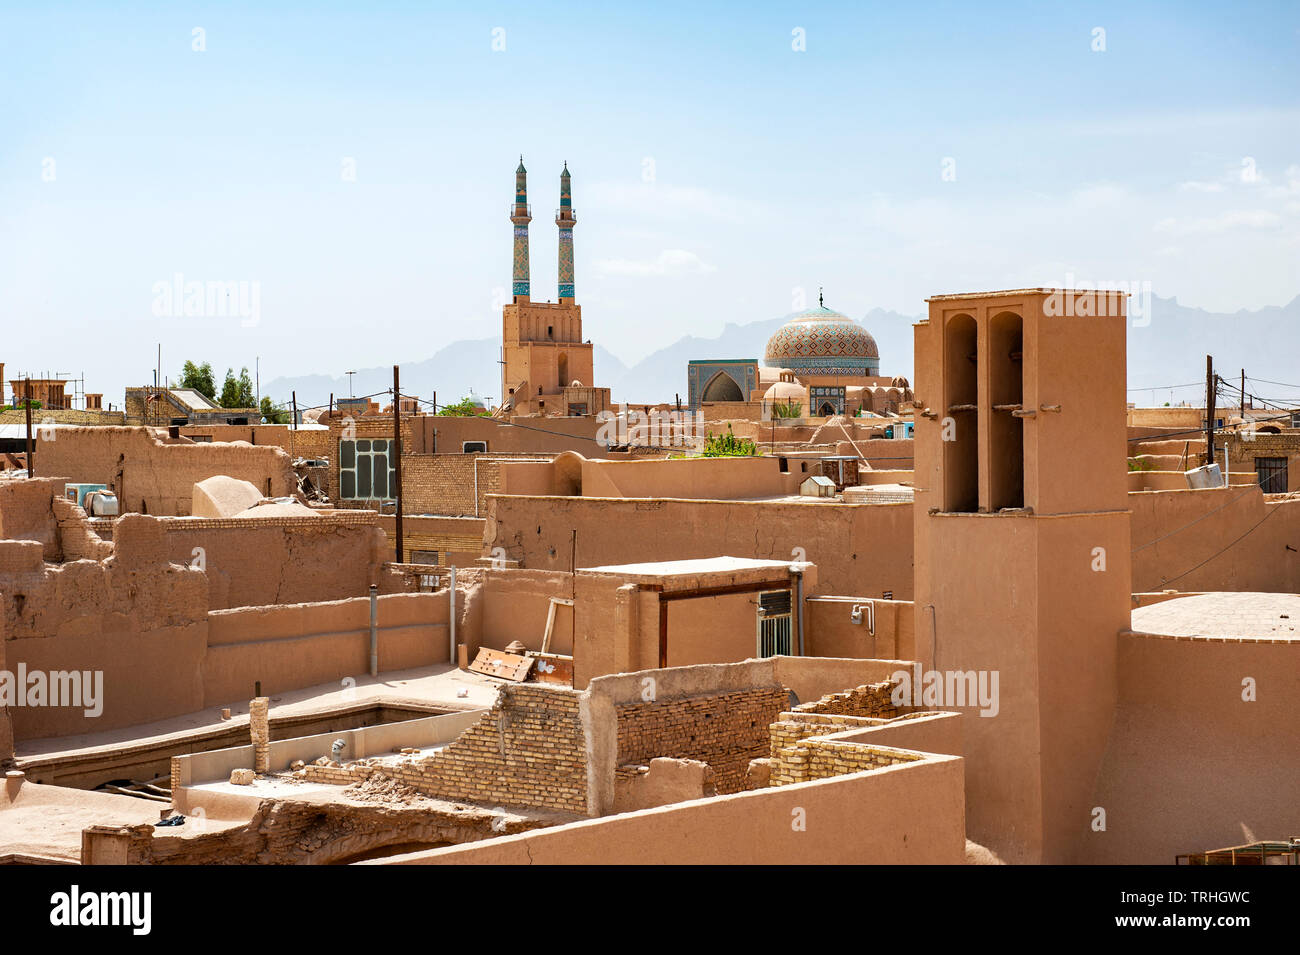 View over the old town of Yazd, a popular tourist destination and Zoroastrian center during Iran's Sassanid era, in Iran. Stock Photo